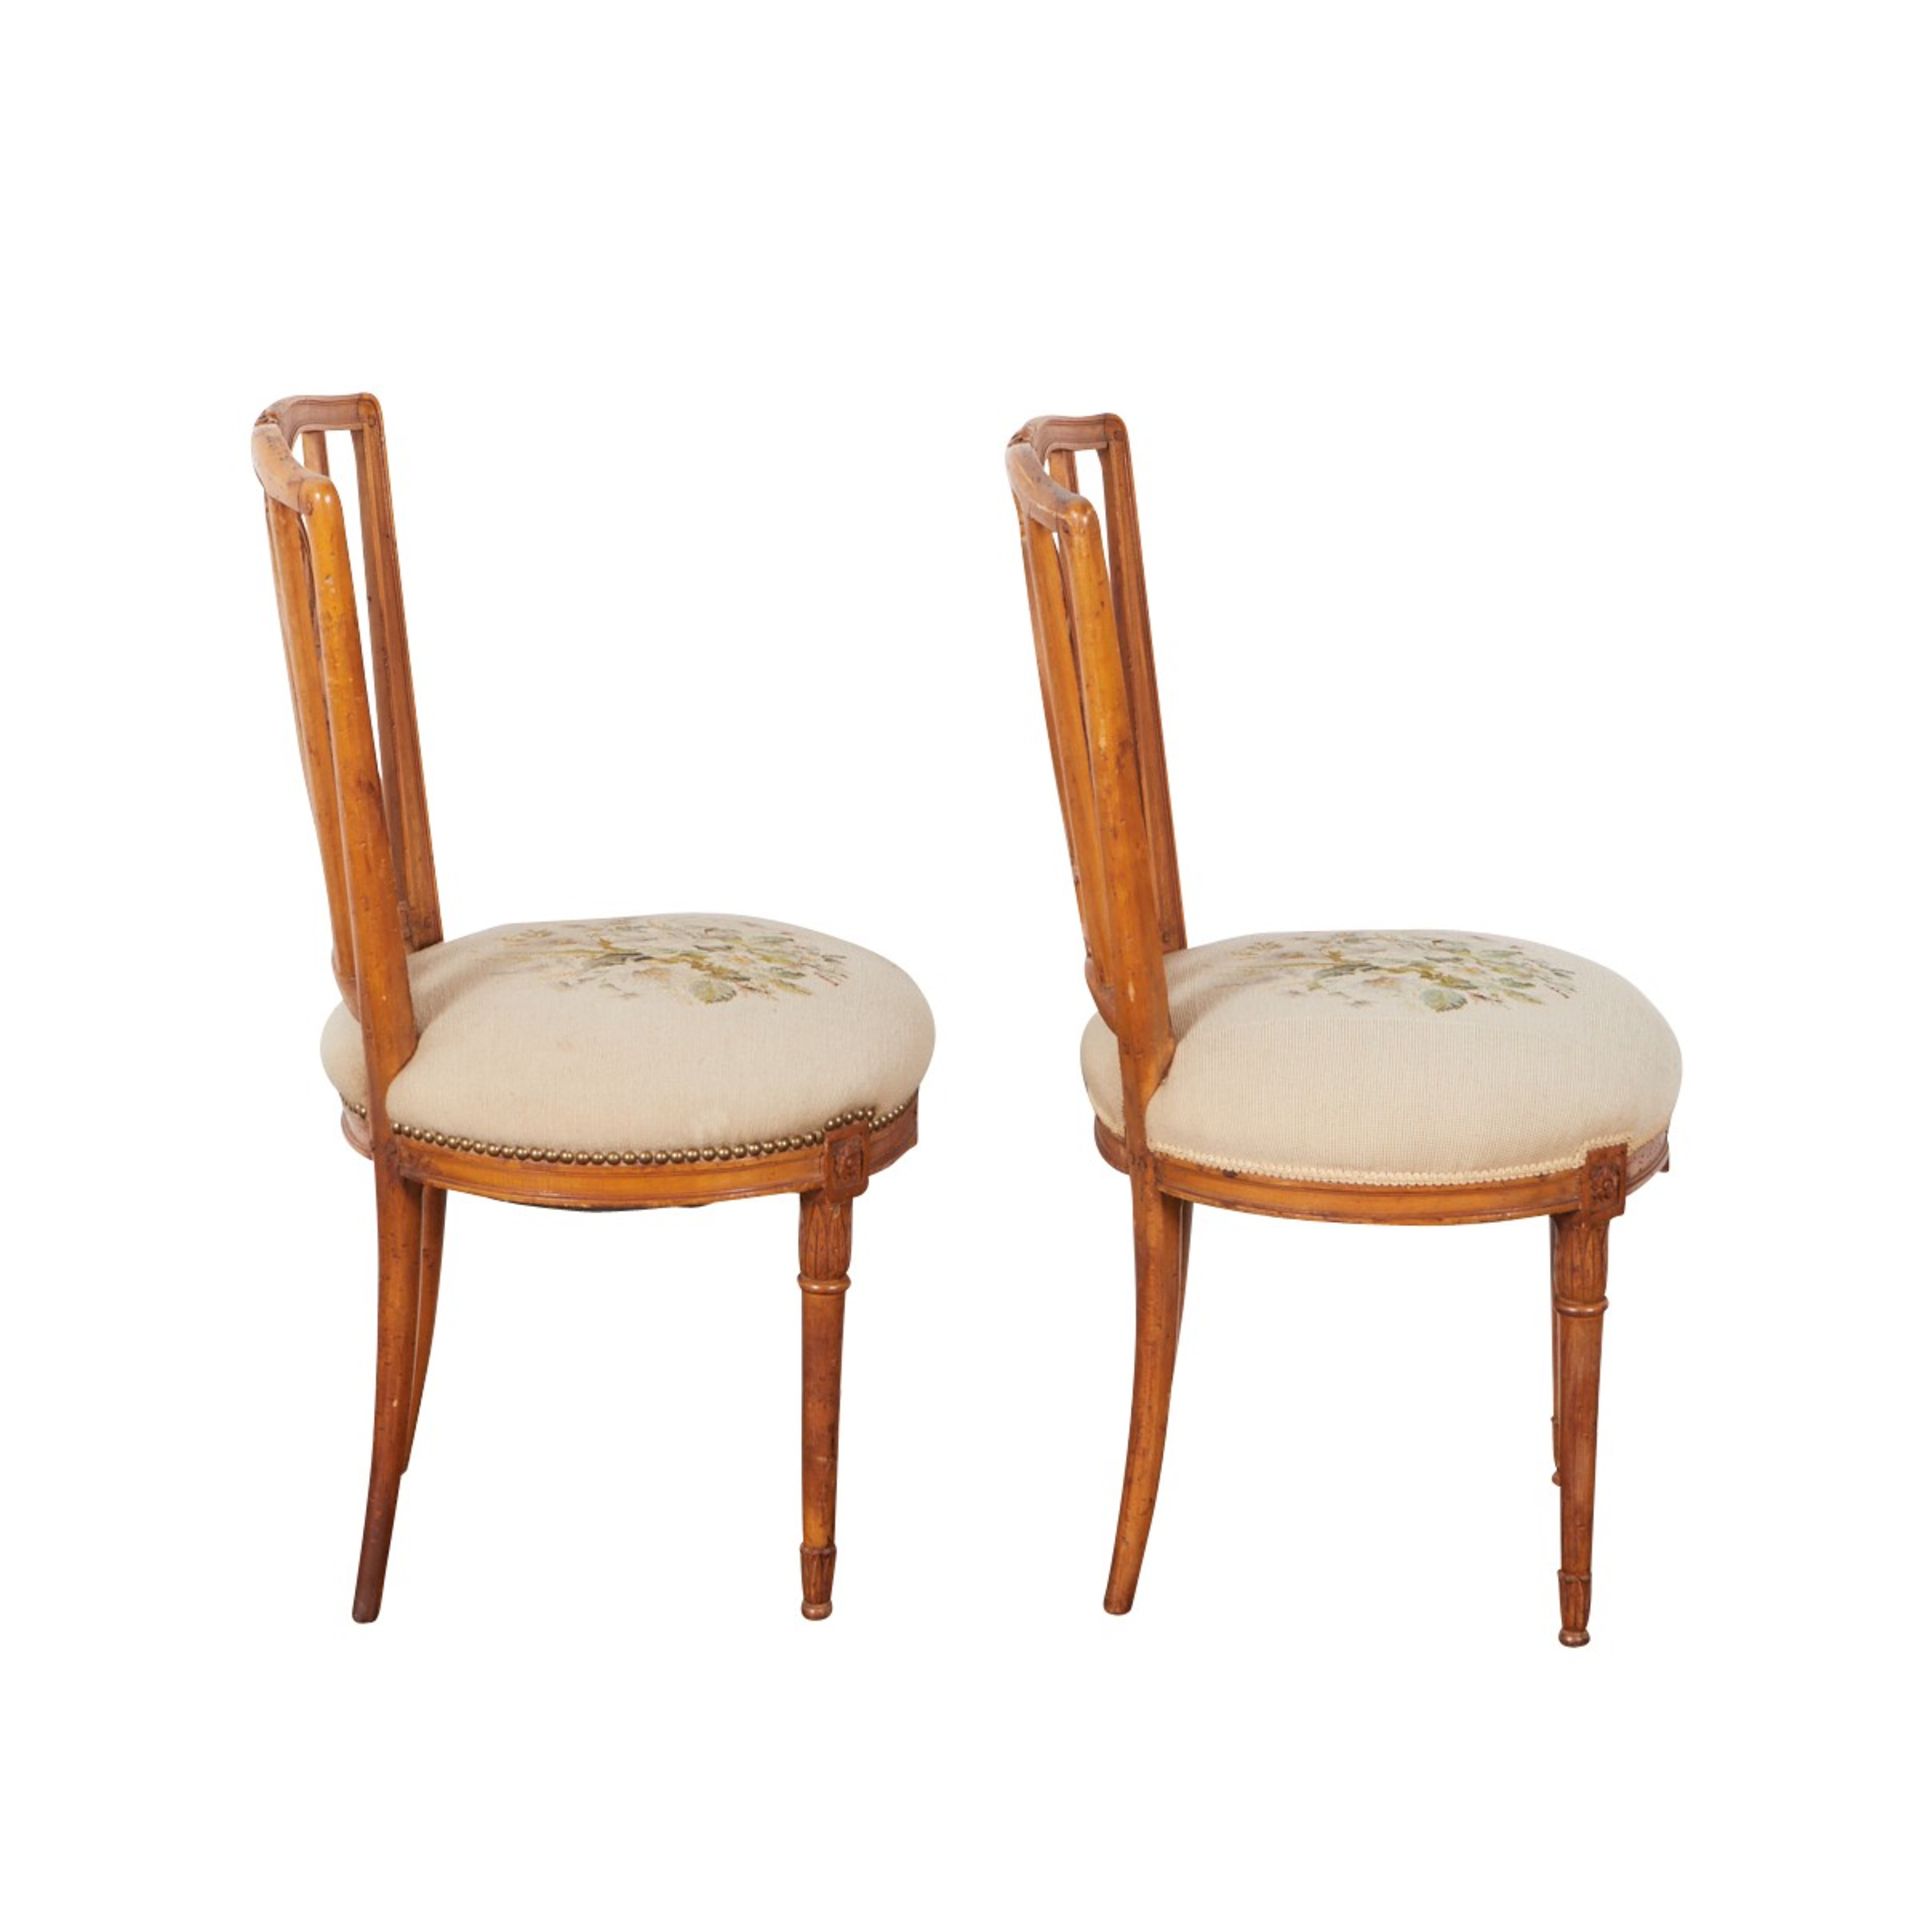 Pr French Side Chairs w/ Floral Decoration - Image 5 of 10